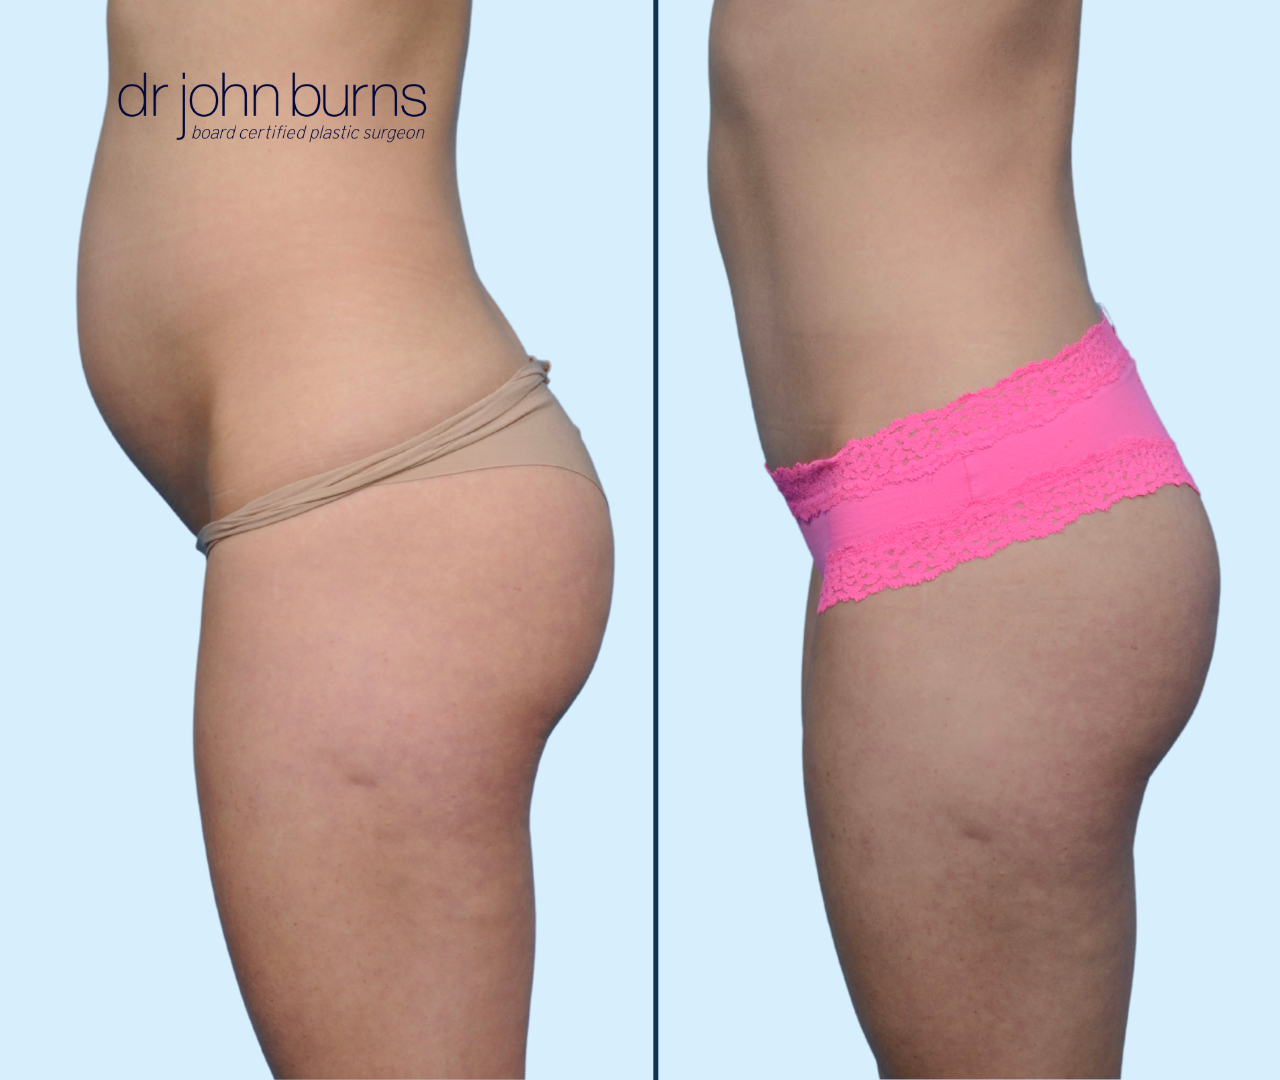 Case 18- Profile View- Before & After Mini Tummy Tuck with Liposuction by Dr. John Burns